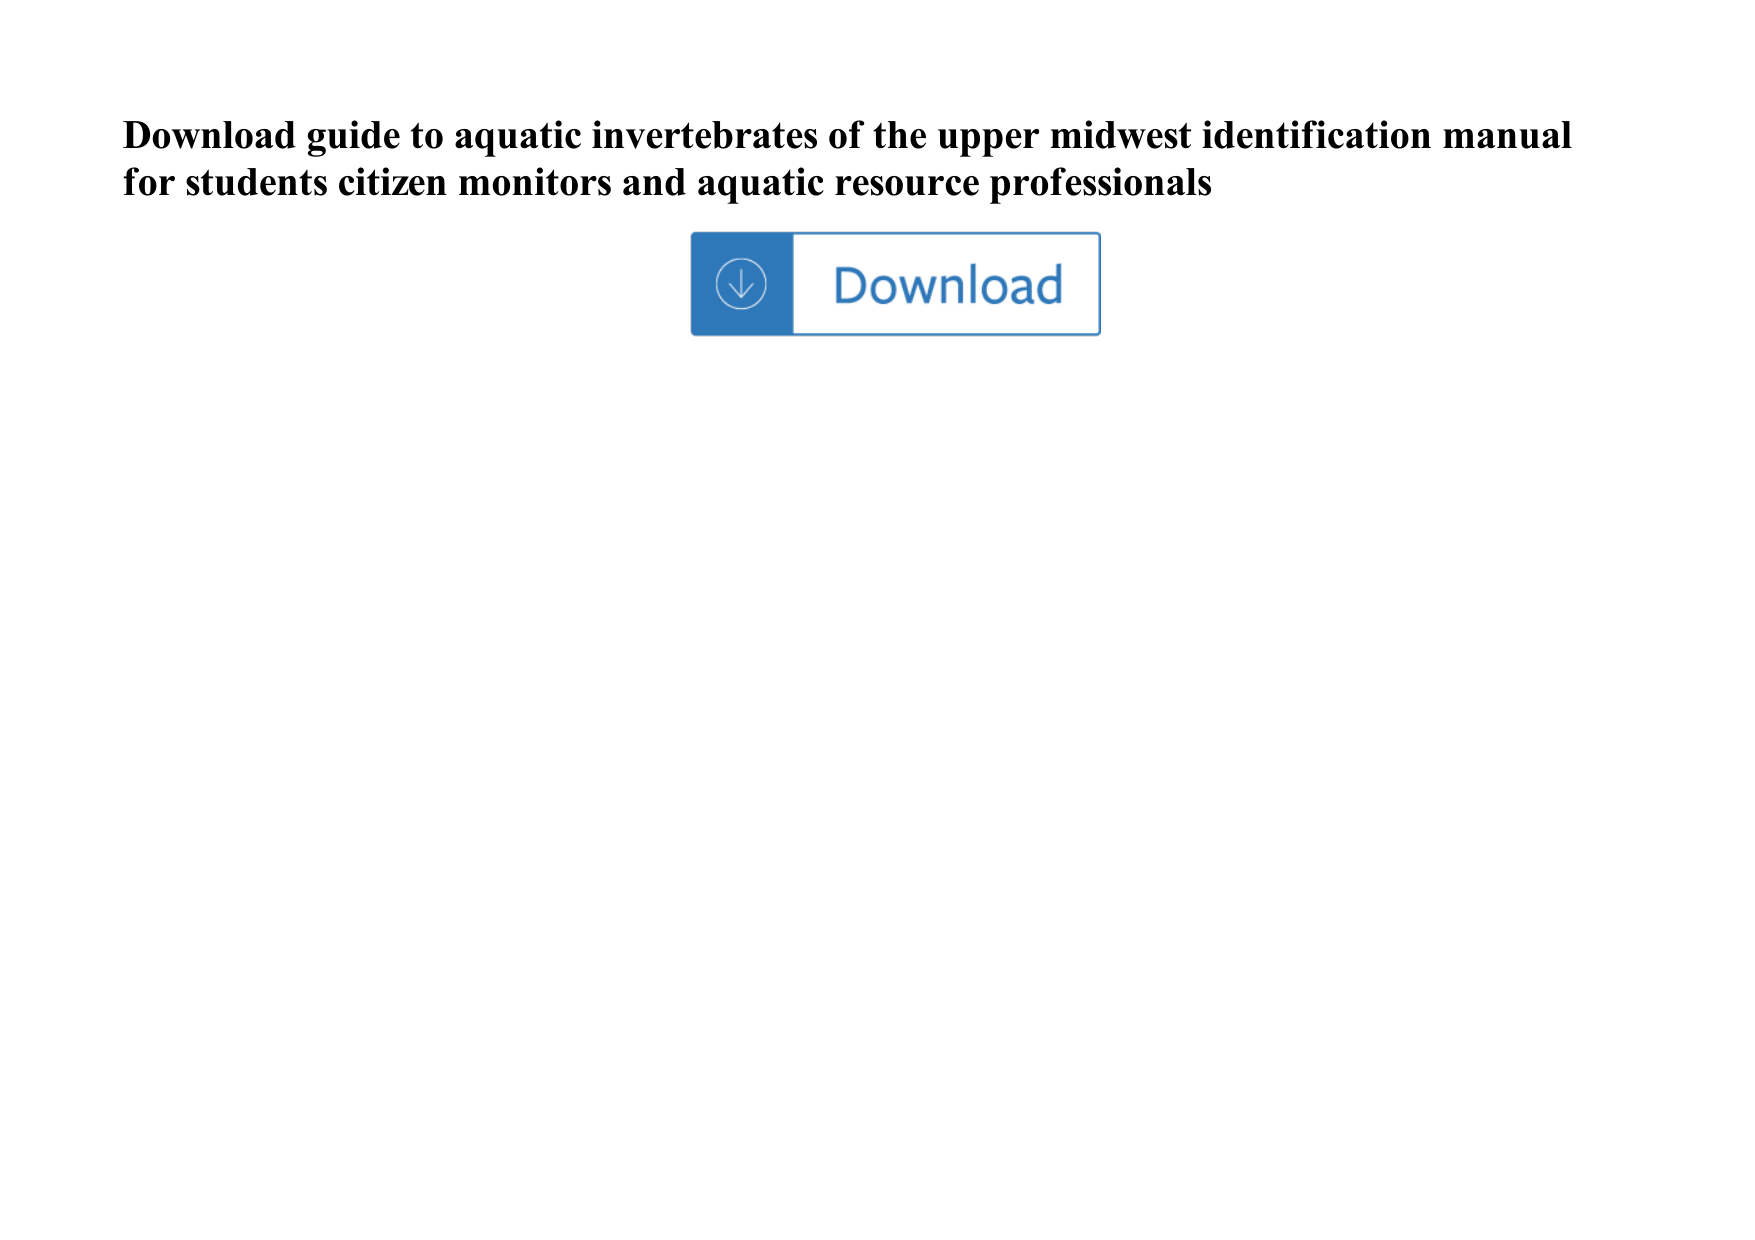 Page 1 of 1 - Guide To Aquatic Invertebrates Of The Upper Midwest Identification Manual For Students Citizen Monitors And Resource Pro Guide-to-aquatic-invertebrates-of-the-upper-midwest-identification-manual-for-students-citizen-monitors-and-aquatic-resource-pro